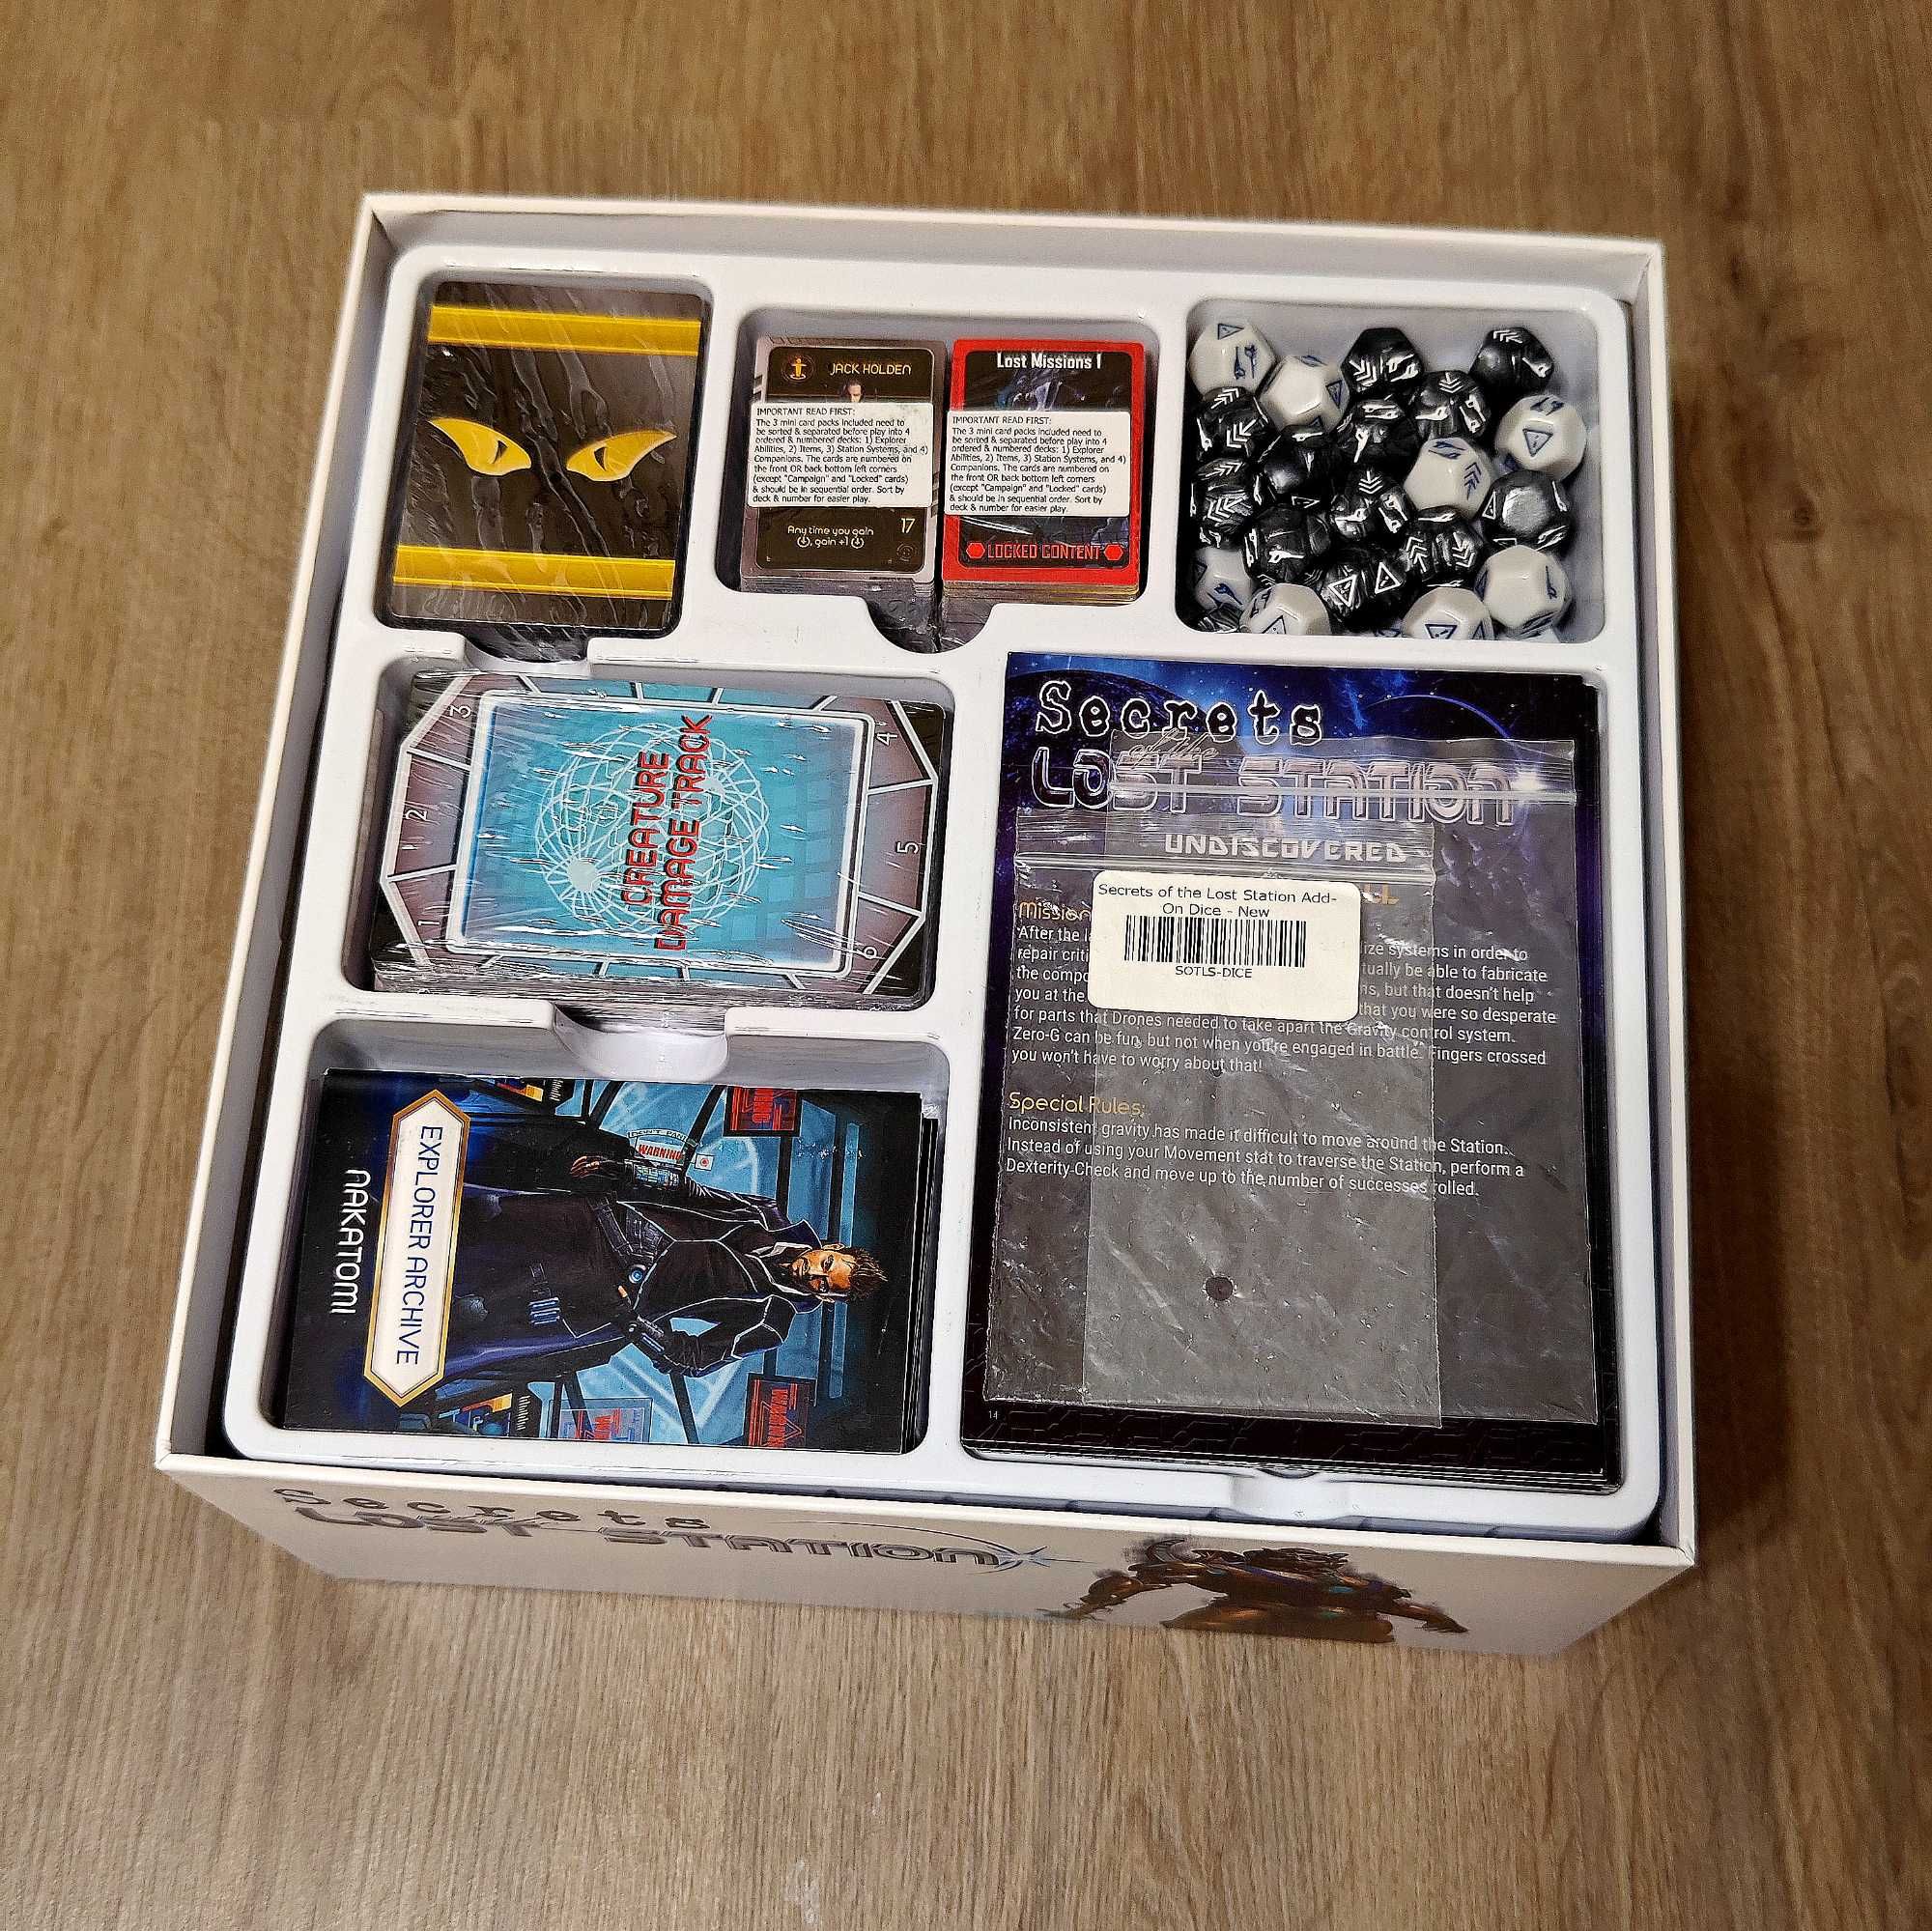 Secrets of The Lost Station + cube deluxe box